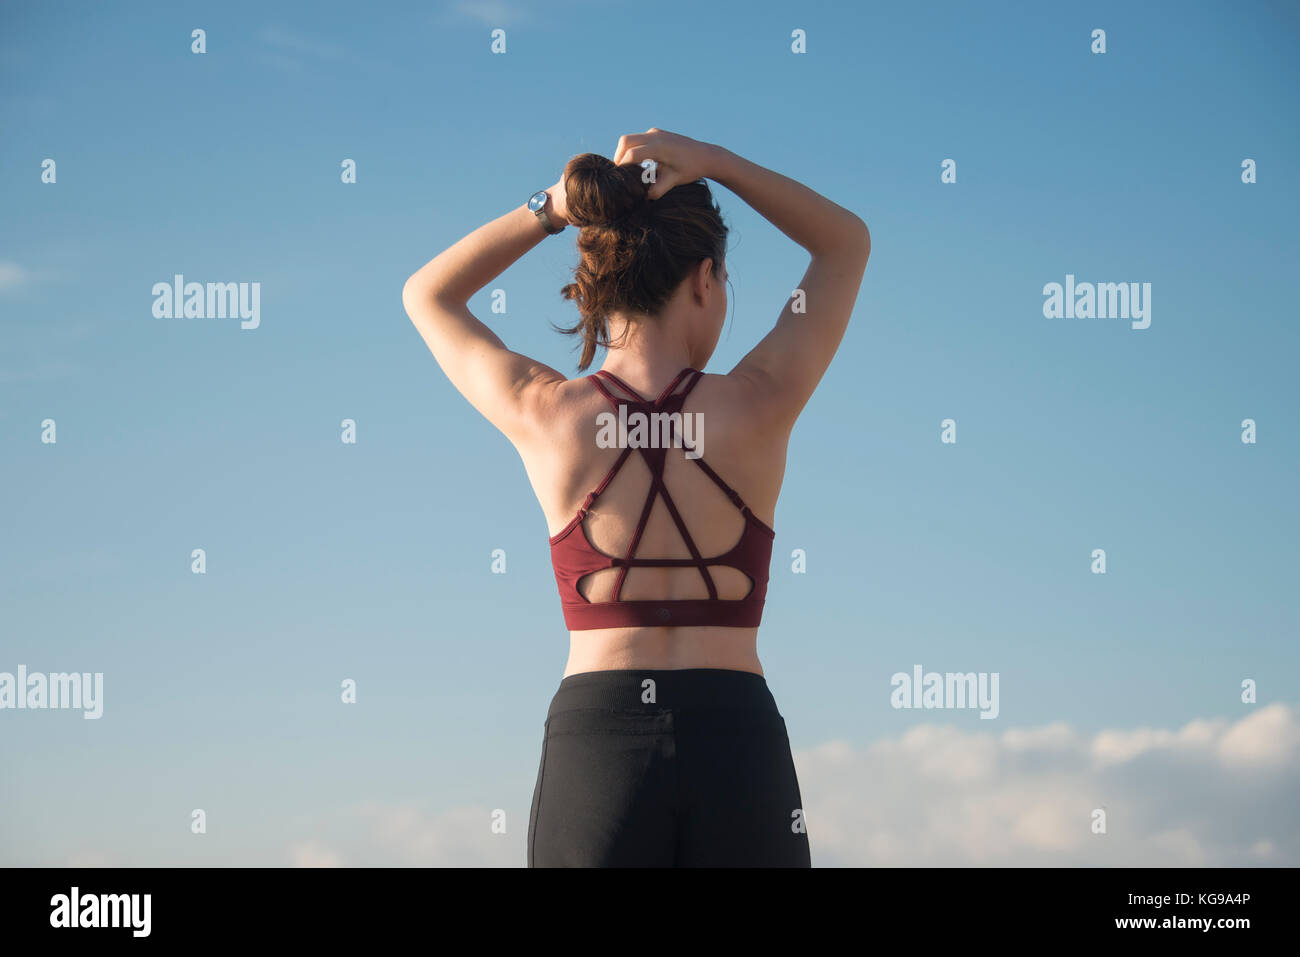 sporty woman tying her hair up before starting exercise and training wearing a sports bra, back view. Stock Photo